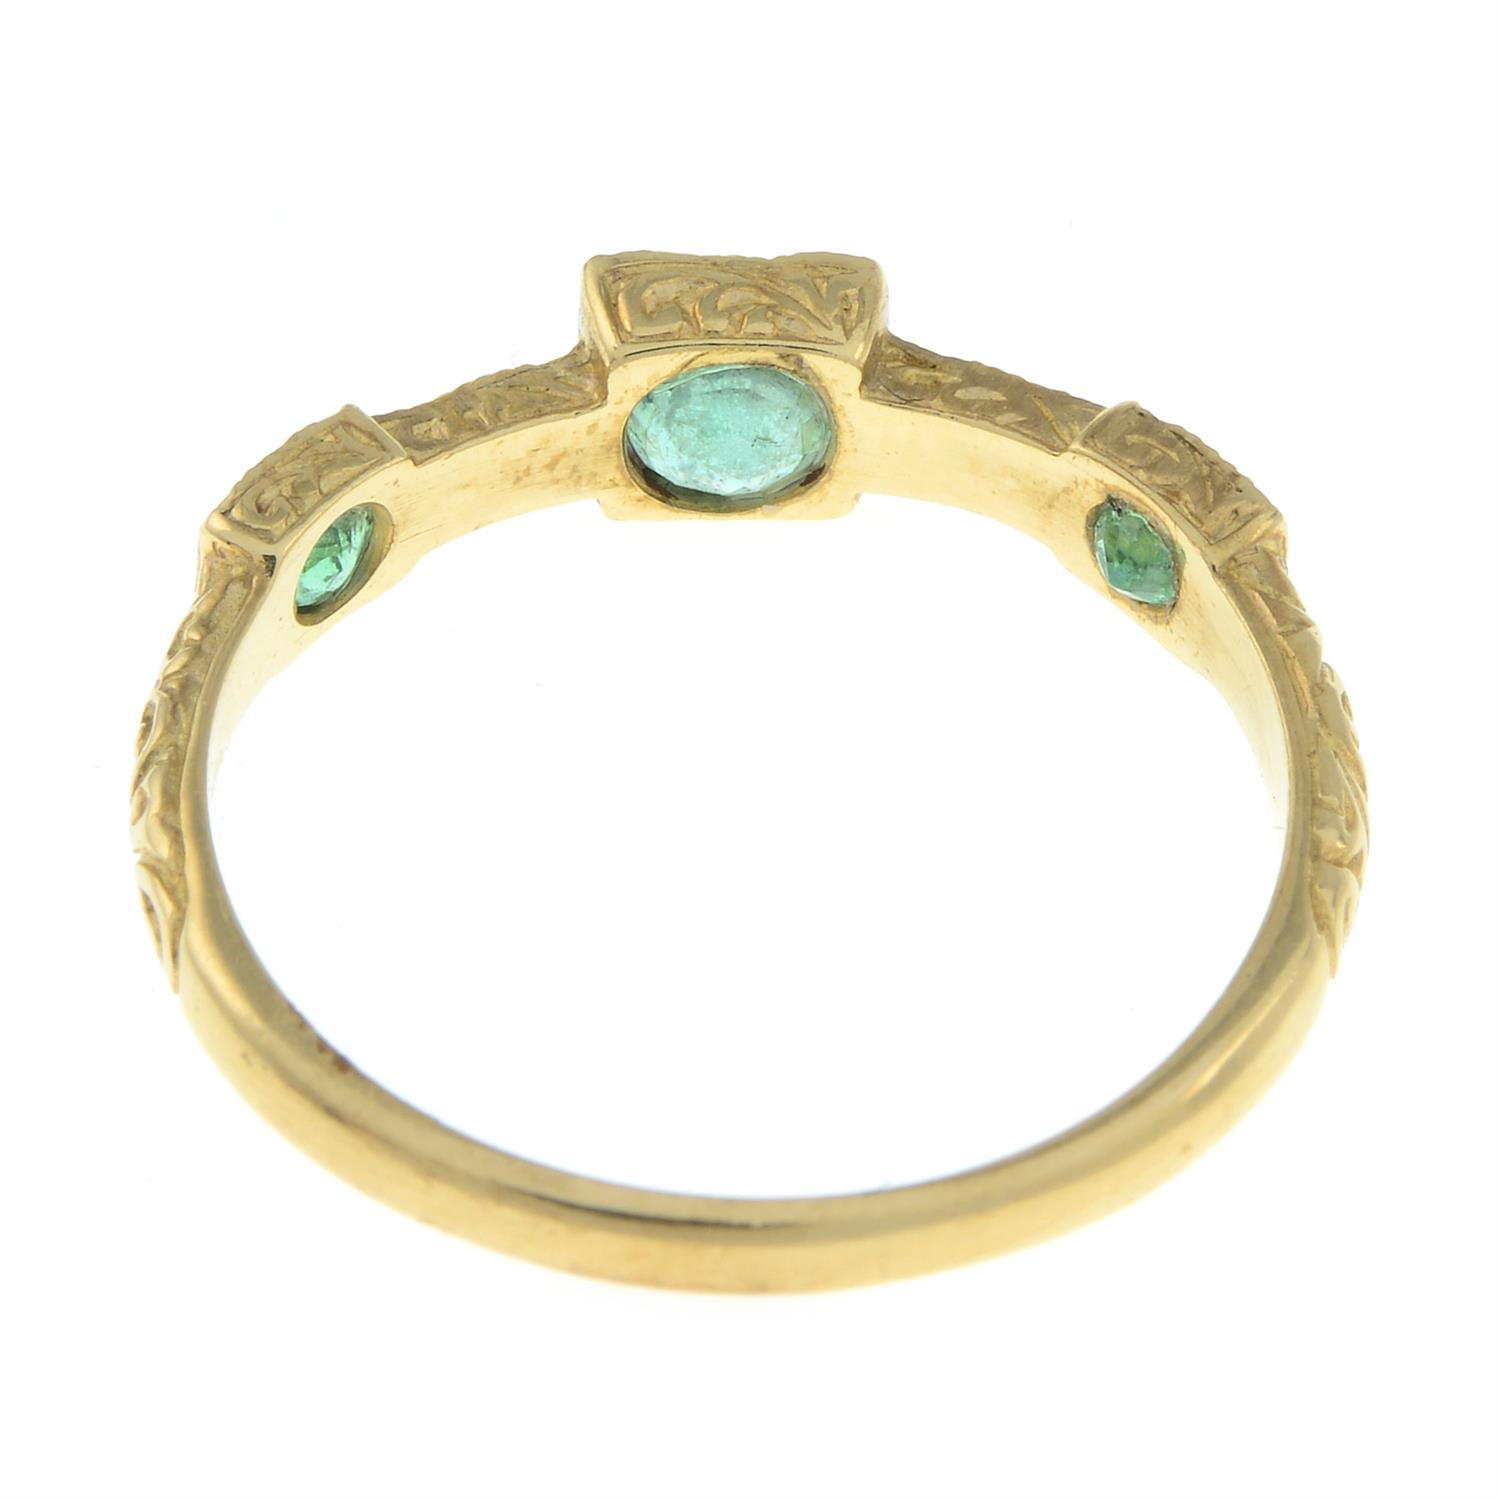 Emerald and diamond ring - Image 2 of 2